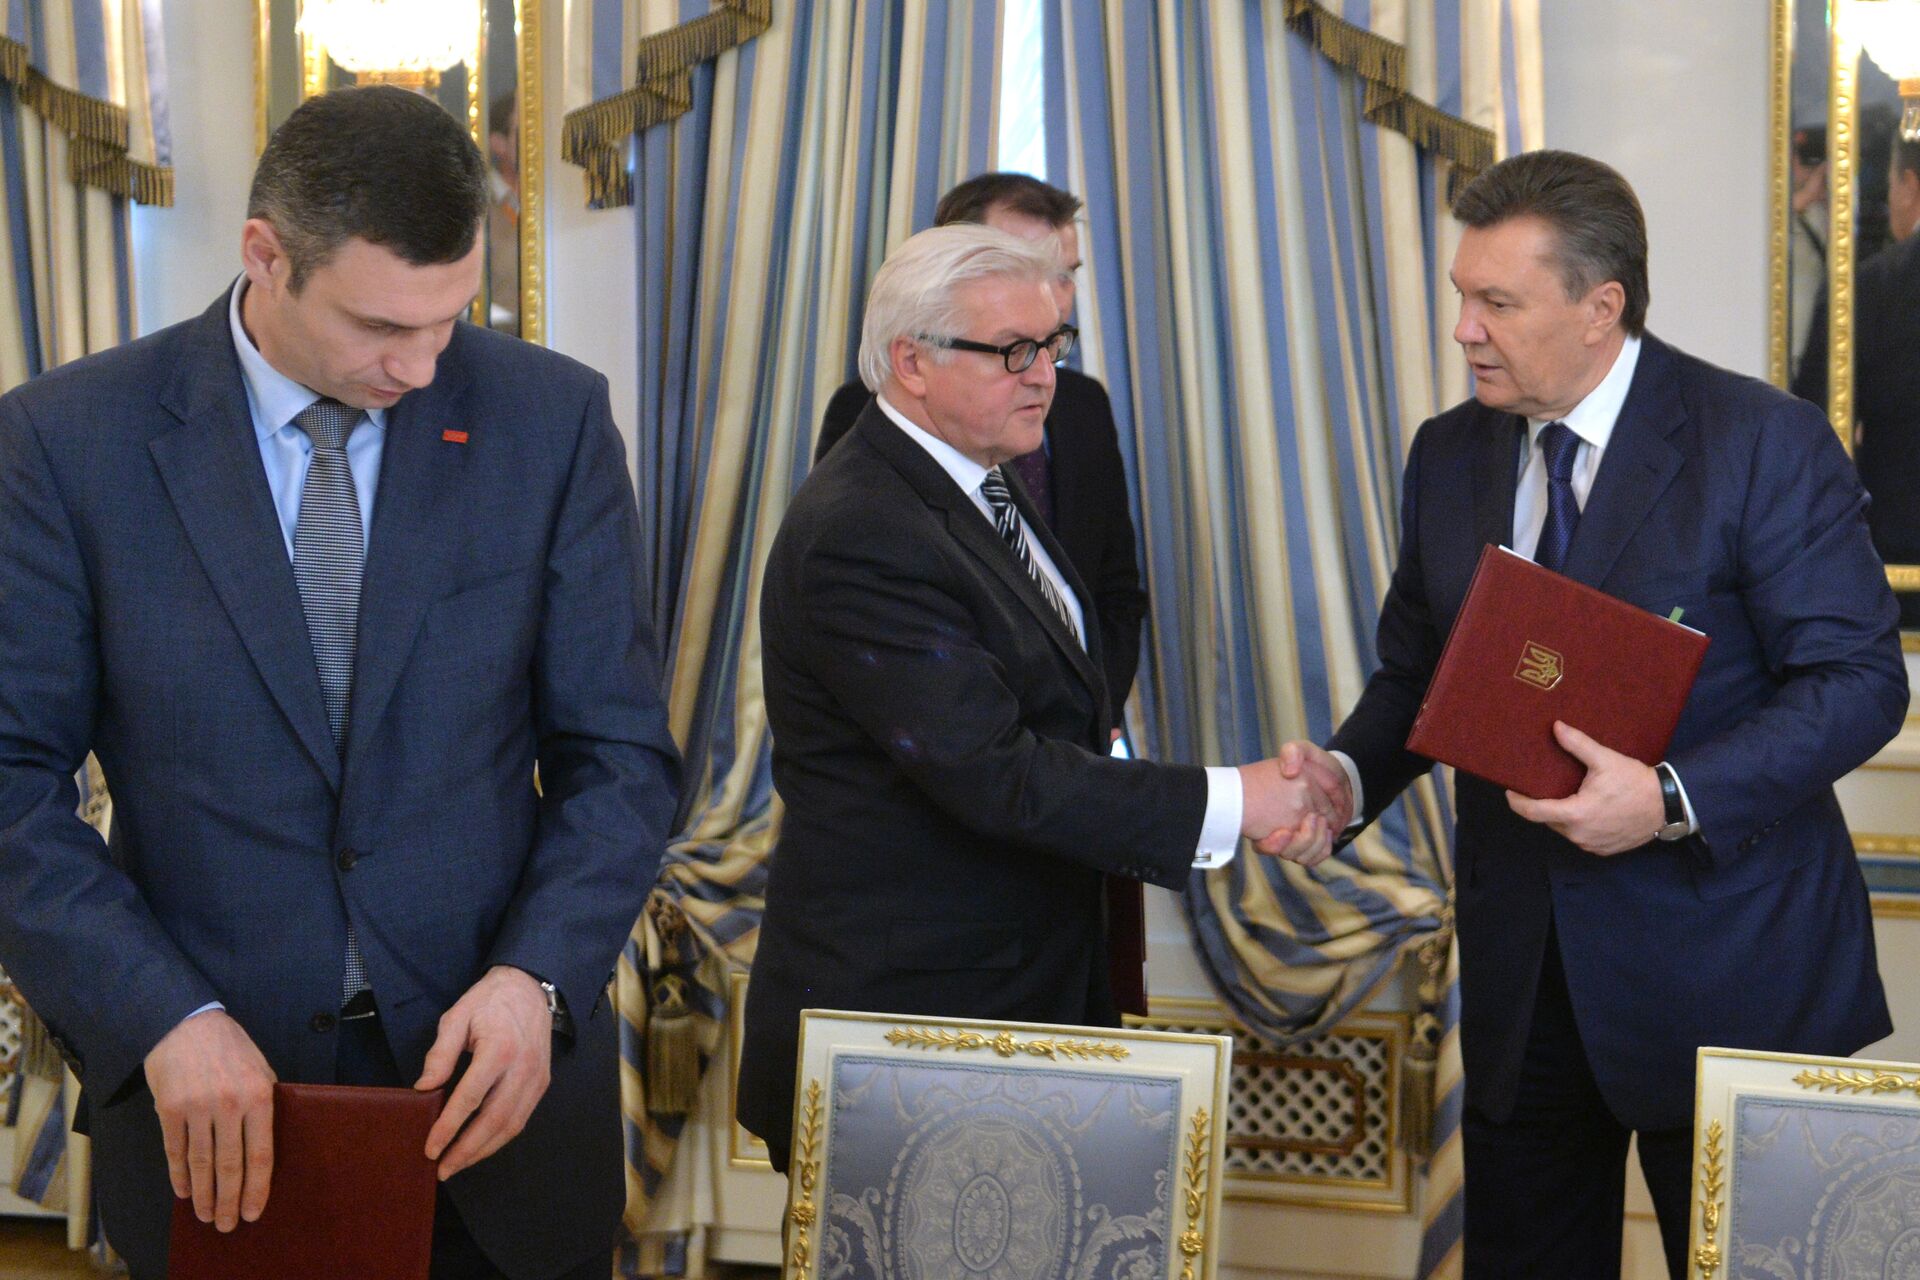 German Foreign Affairs minister Frank-Walter Steinmeier (C) and Ukrainian President Viktor Yanukovych (R) shake hands as head of Vitali Klitschko, one of Maidan's leaders, looks on after the signing of what was thought to be a compromise deal in Kiev on February 21, 2014 - Sputnik International, 1920, 25.02.2024